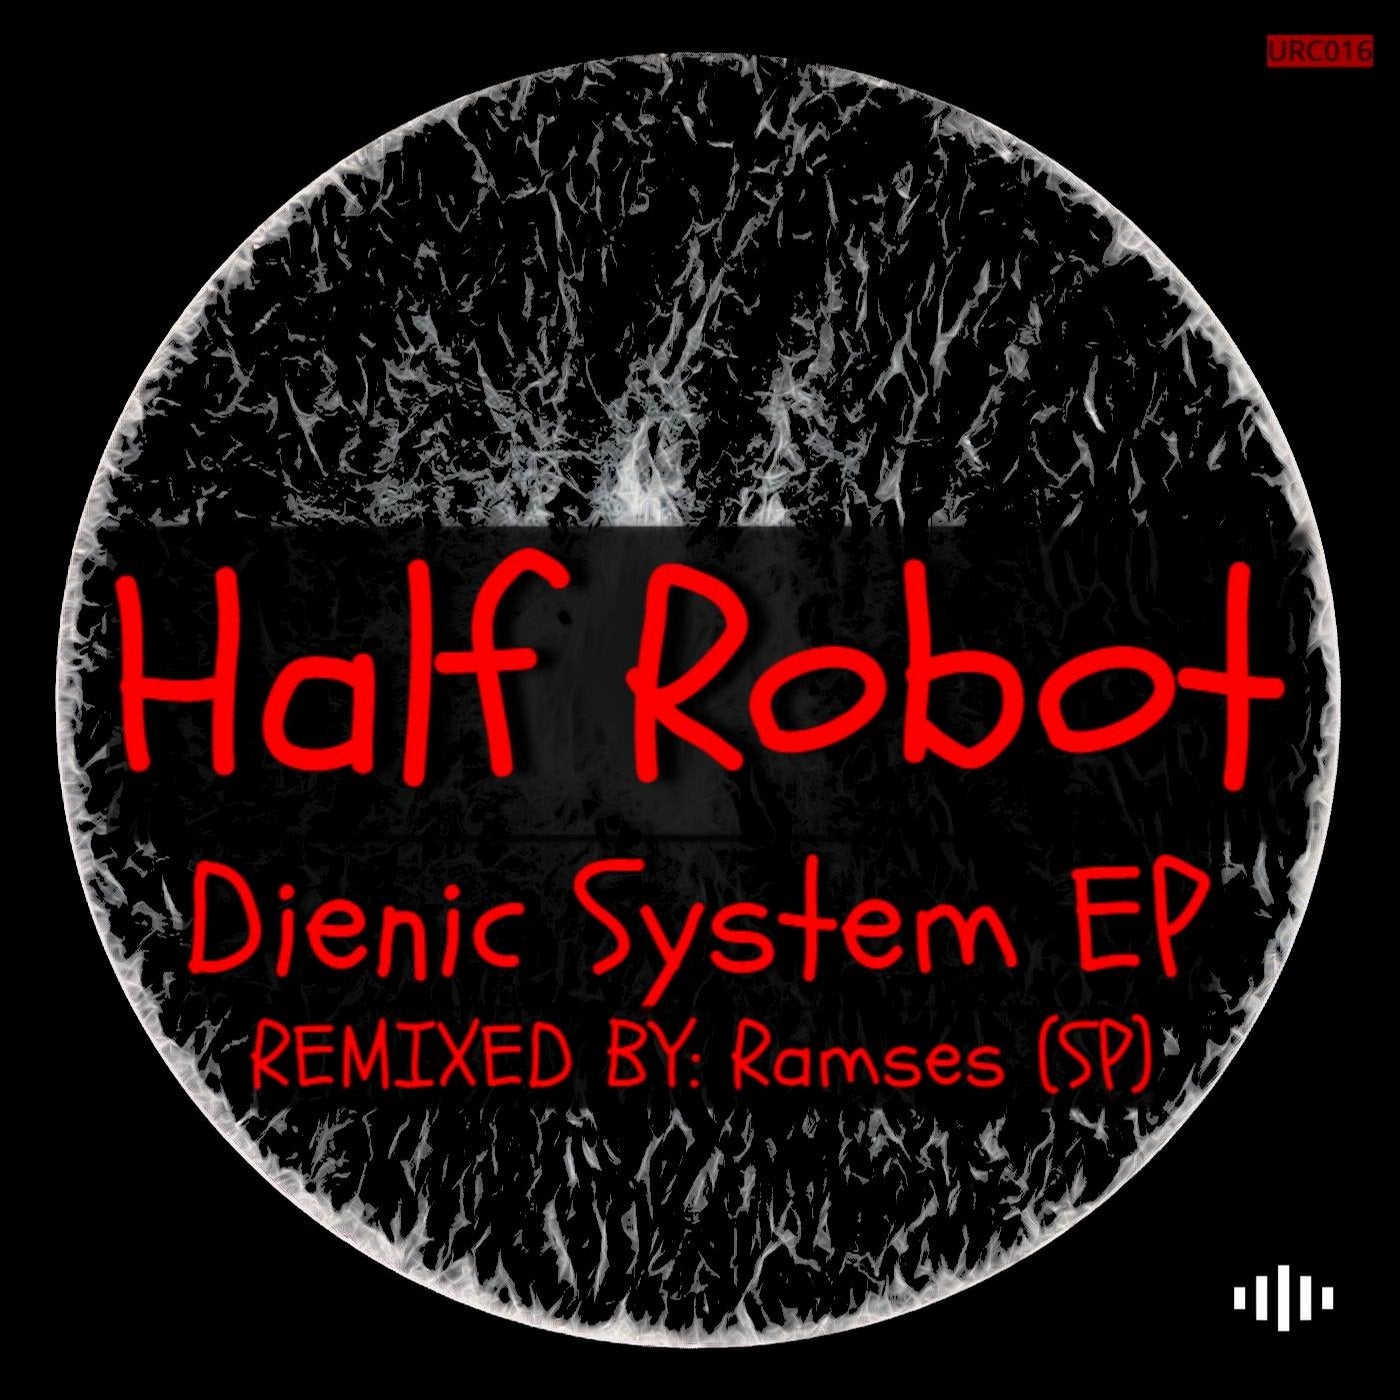 Dienic System EP - Remixed by Ramses (SP)